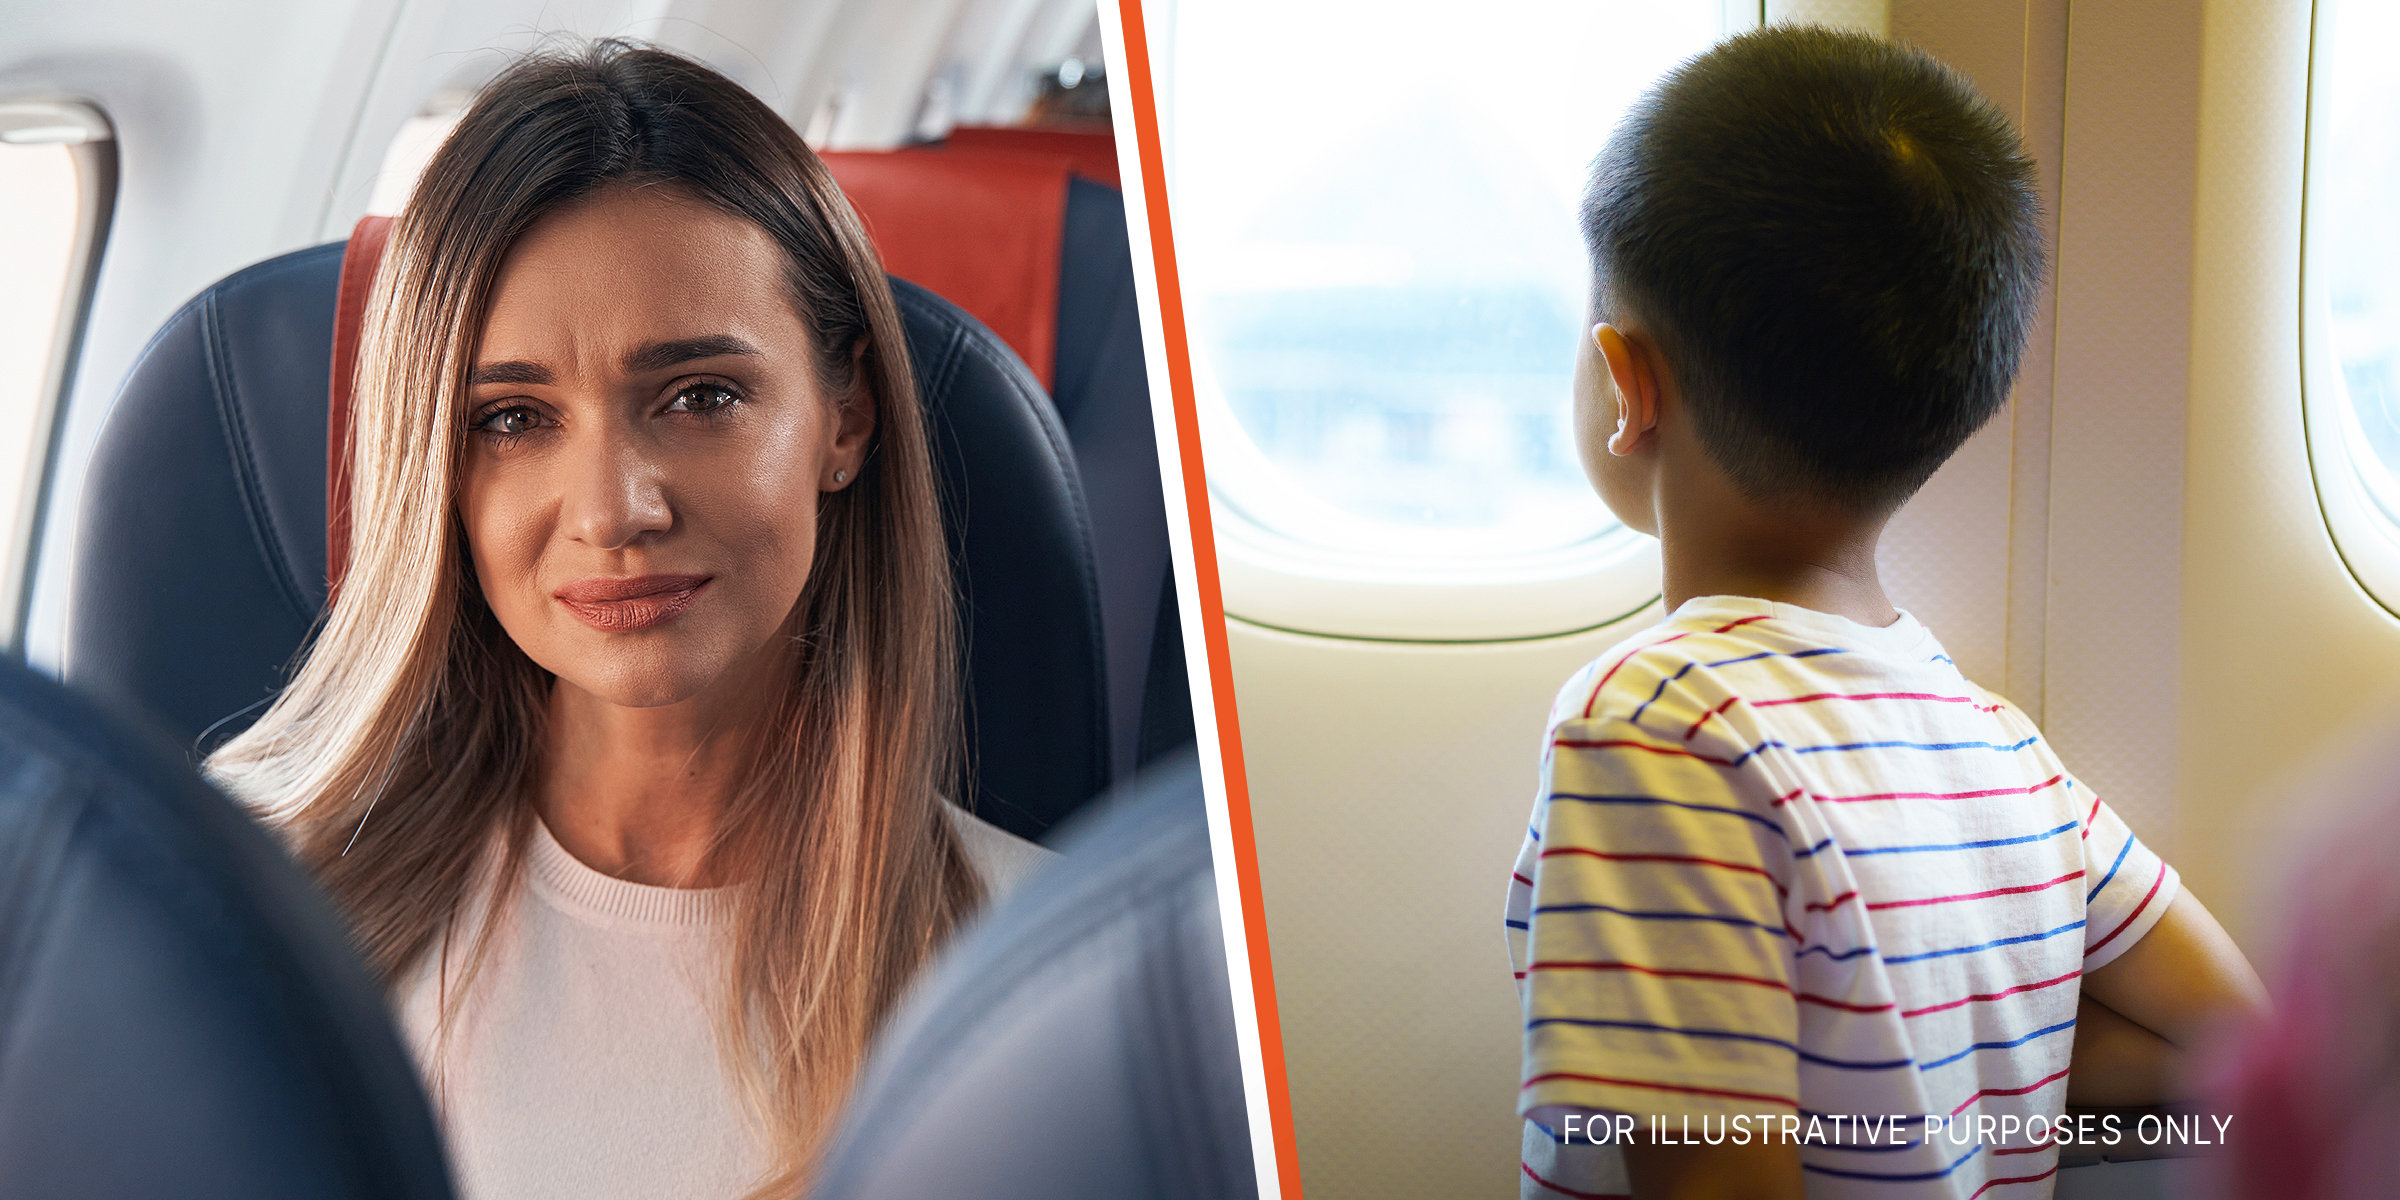 A woman crying in an airplane | A child sitting in a window seat | Source: Shutterstock